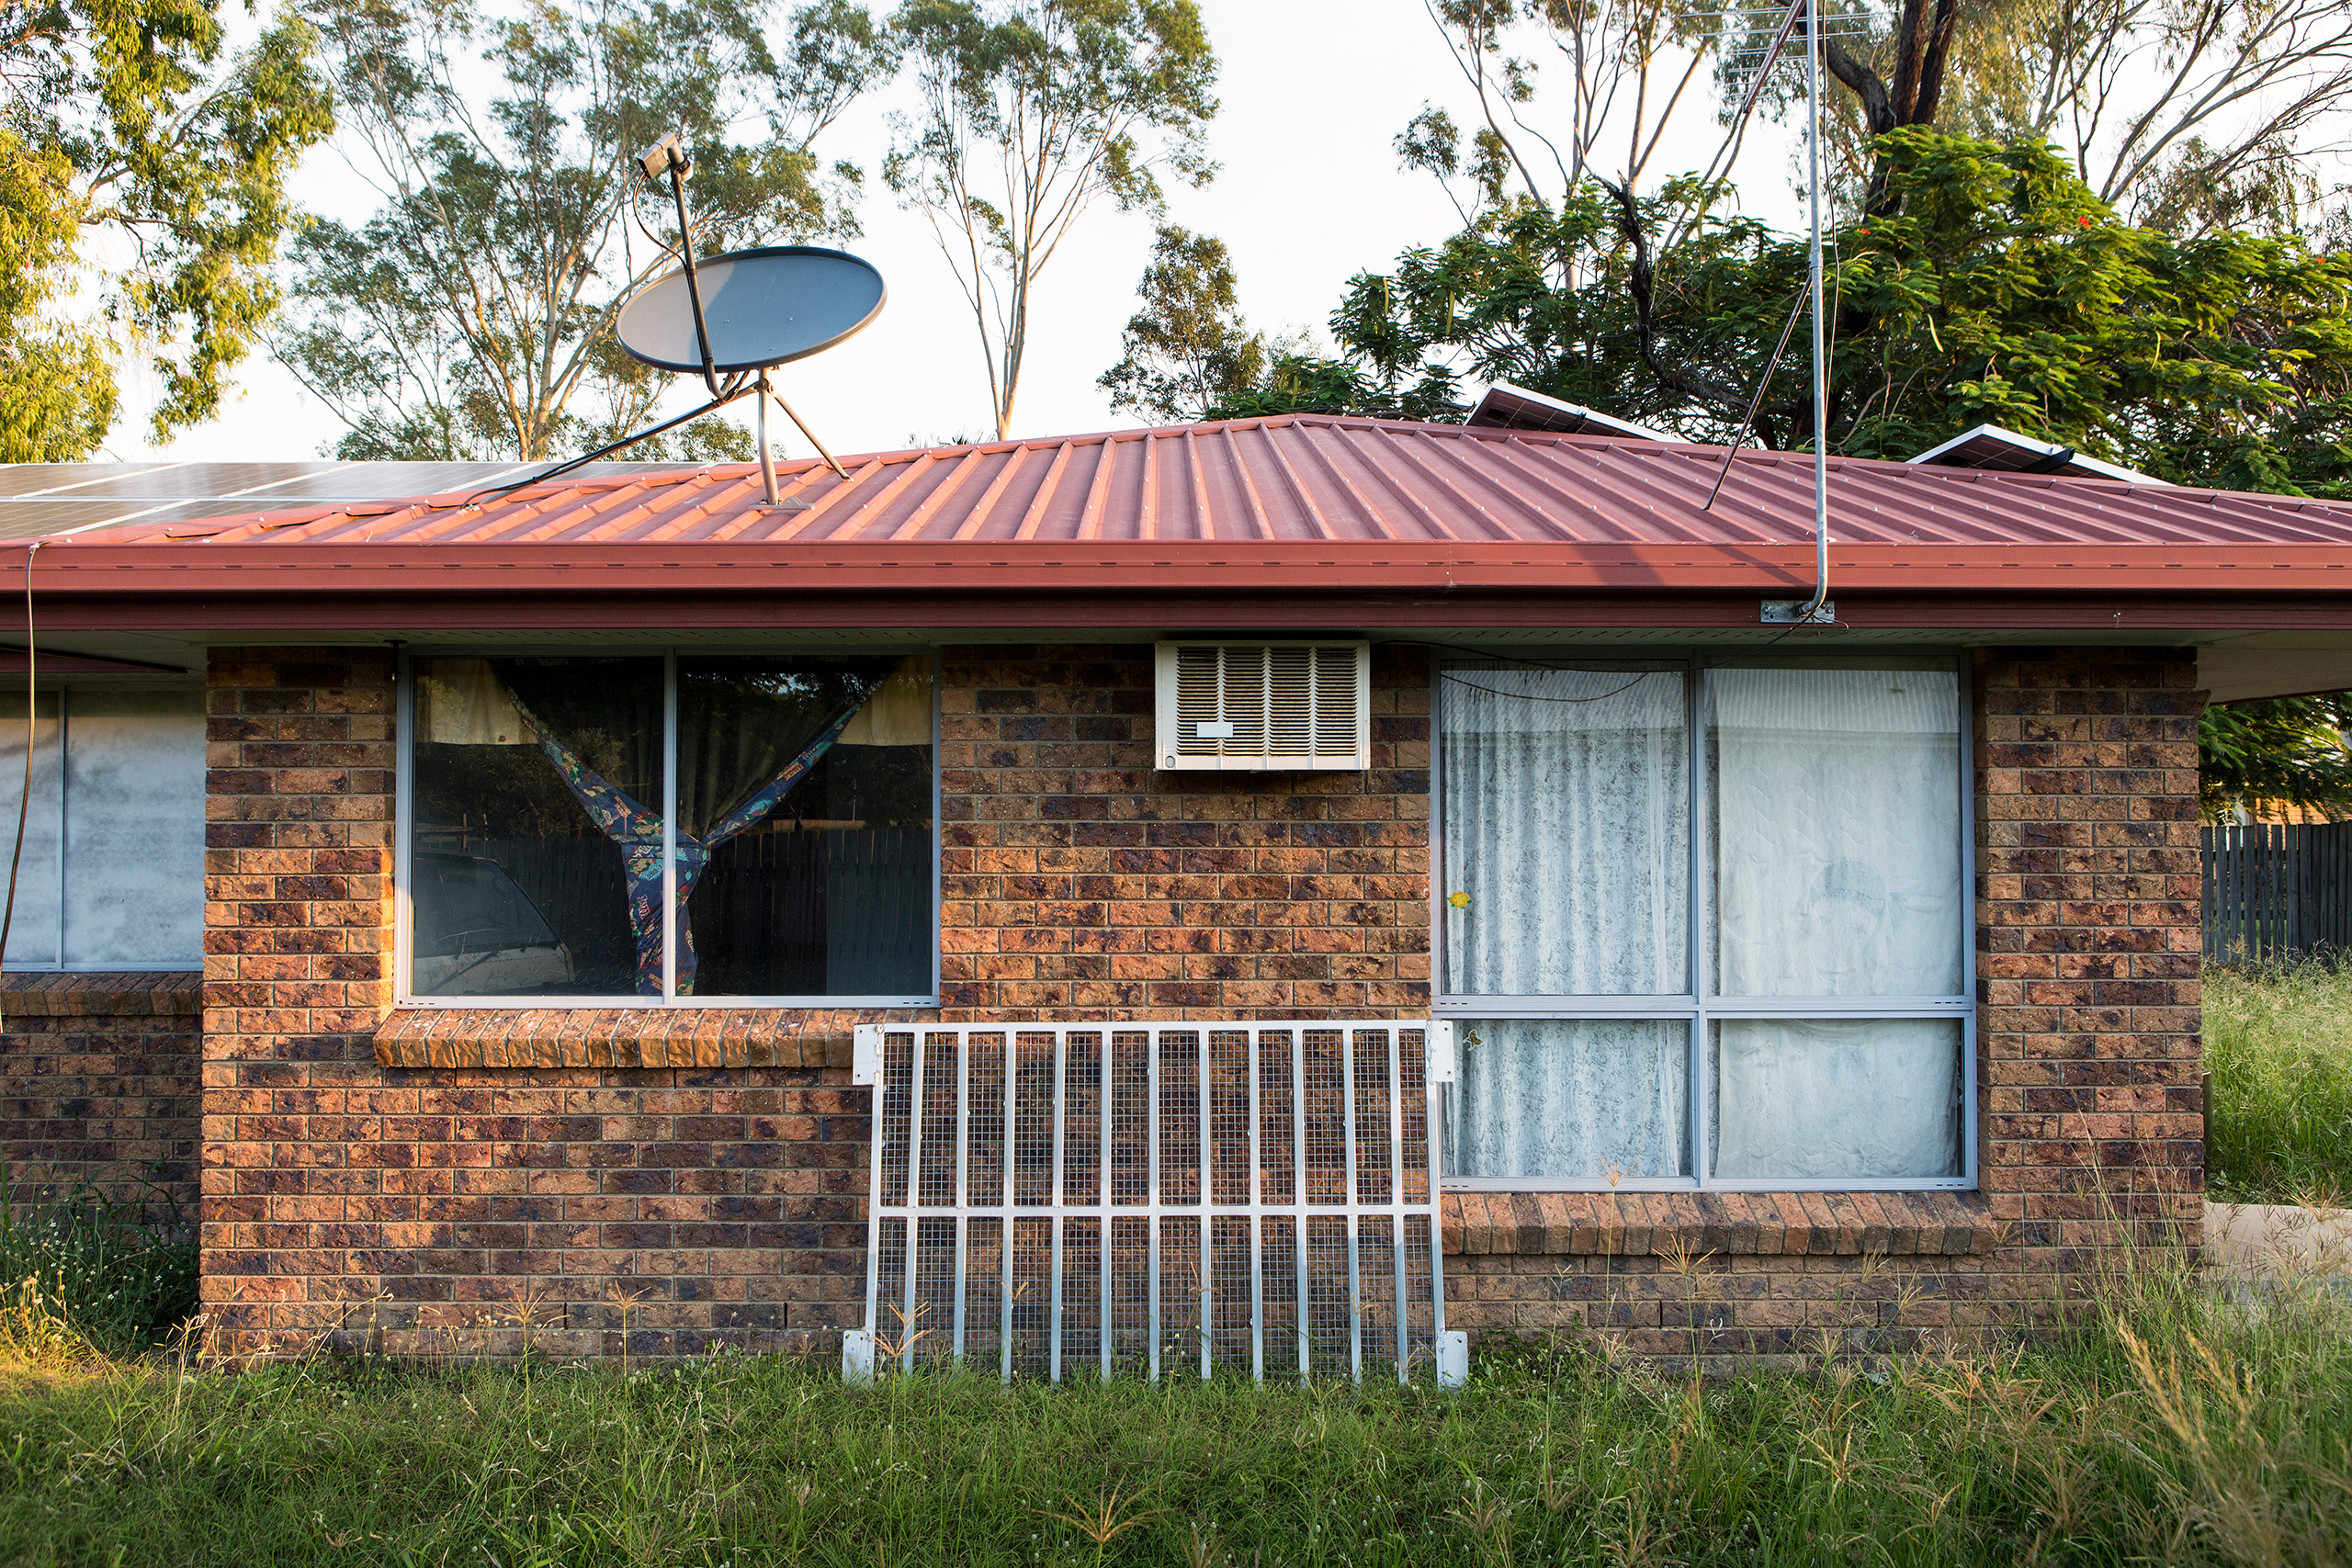 Part of the cage that Daphne used to lock in her son Wylie rests against their previous home in Rockhampton. (David Maurice Smith—Oculi for TIME)